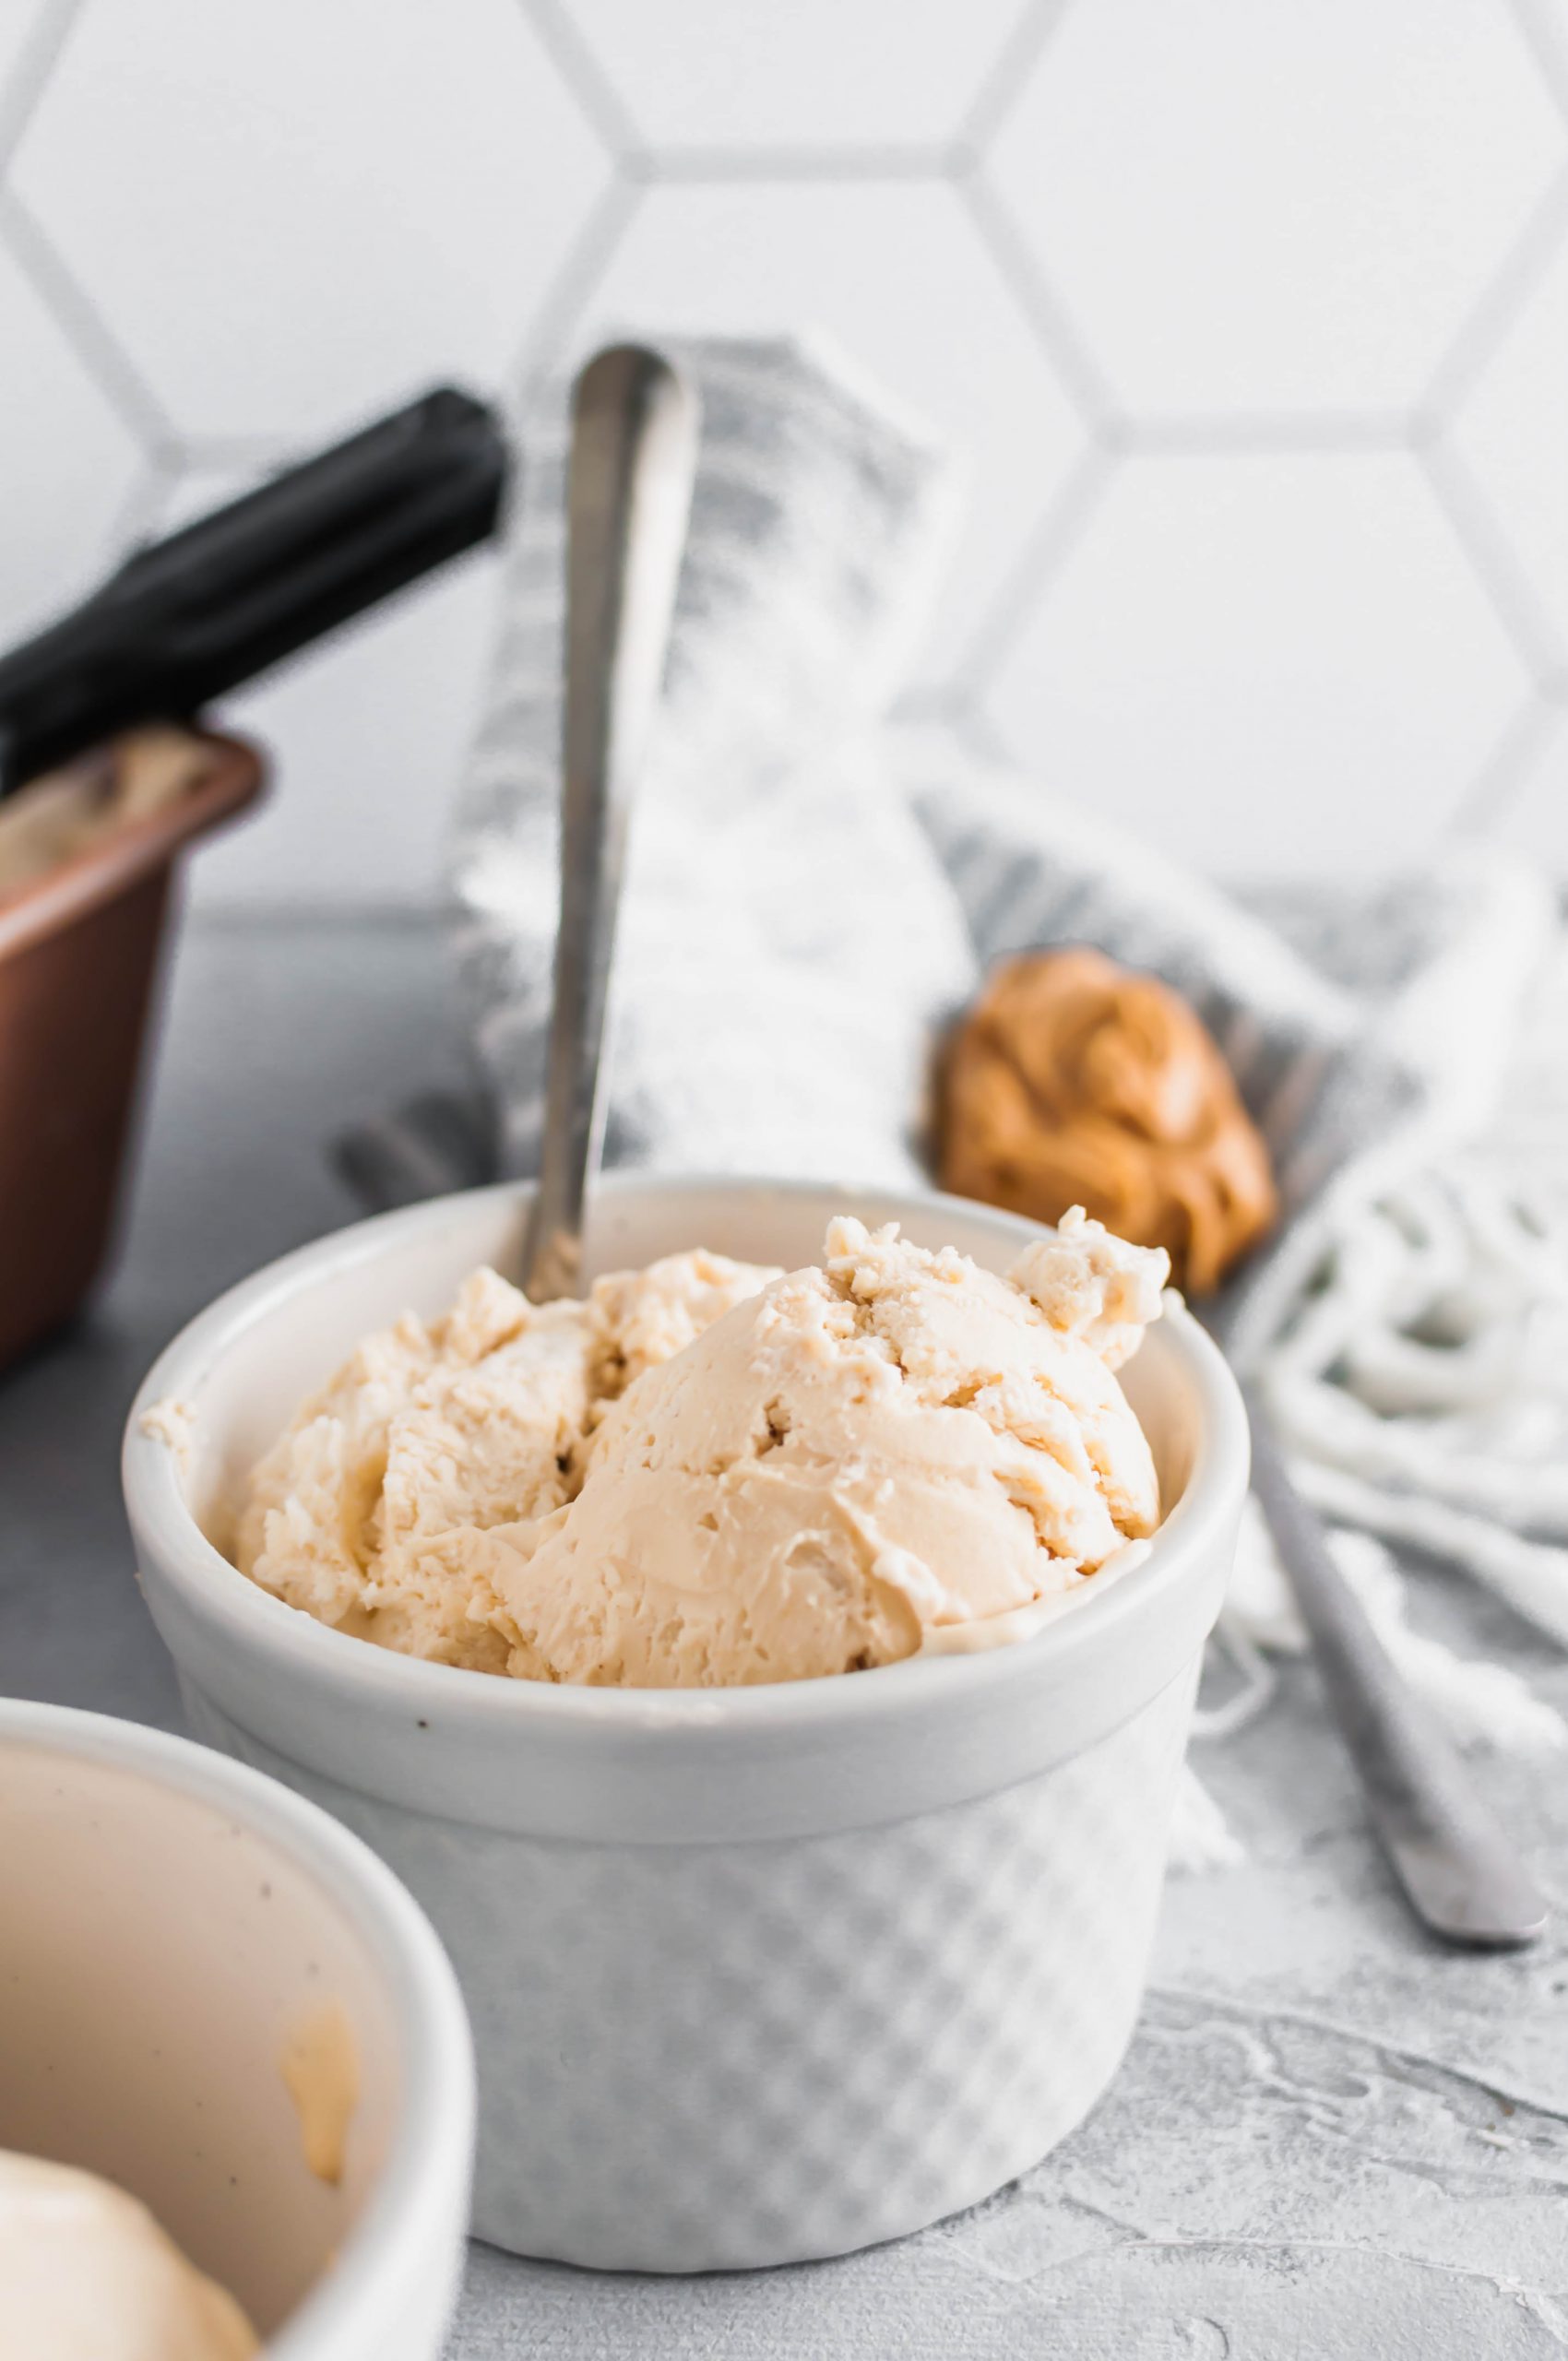 No ice cream maker? No problem! You can make this easy, incredibly rich Peanut Butter No Churn Ice Cream by hand with just 4 ingredients.